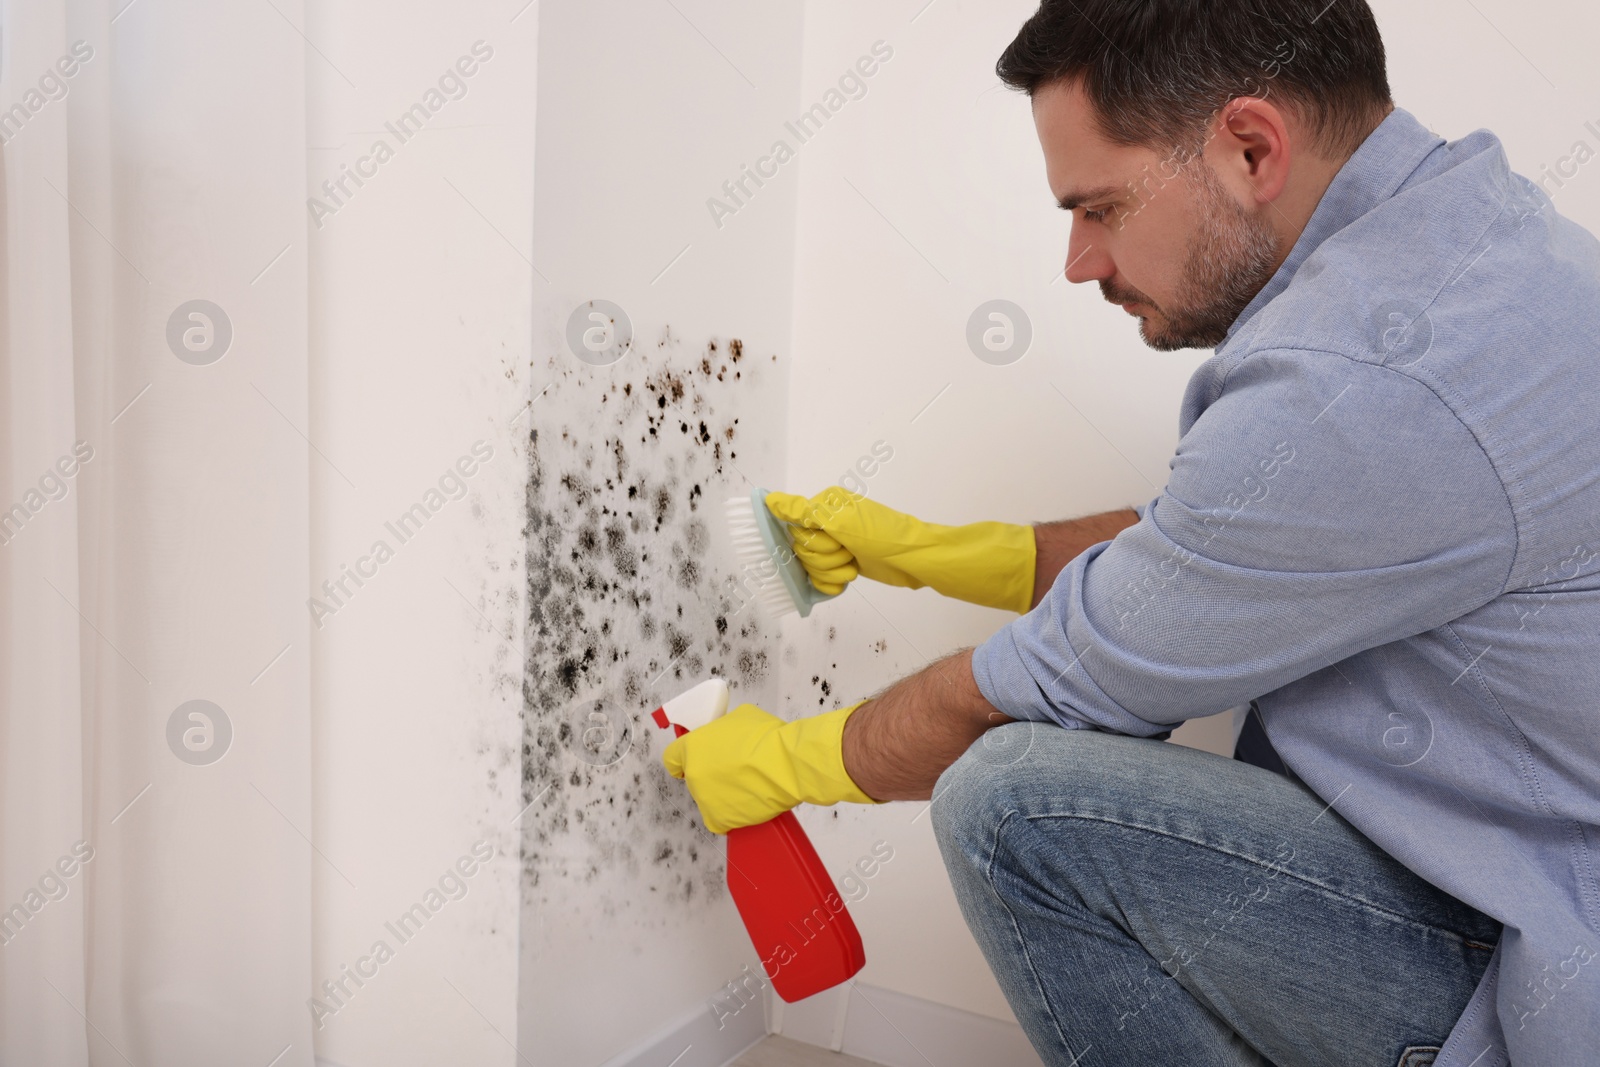 Image of Man in rubber gloves using mold remover and brush on walls in room